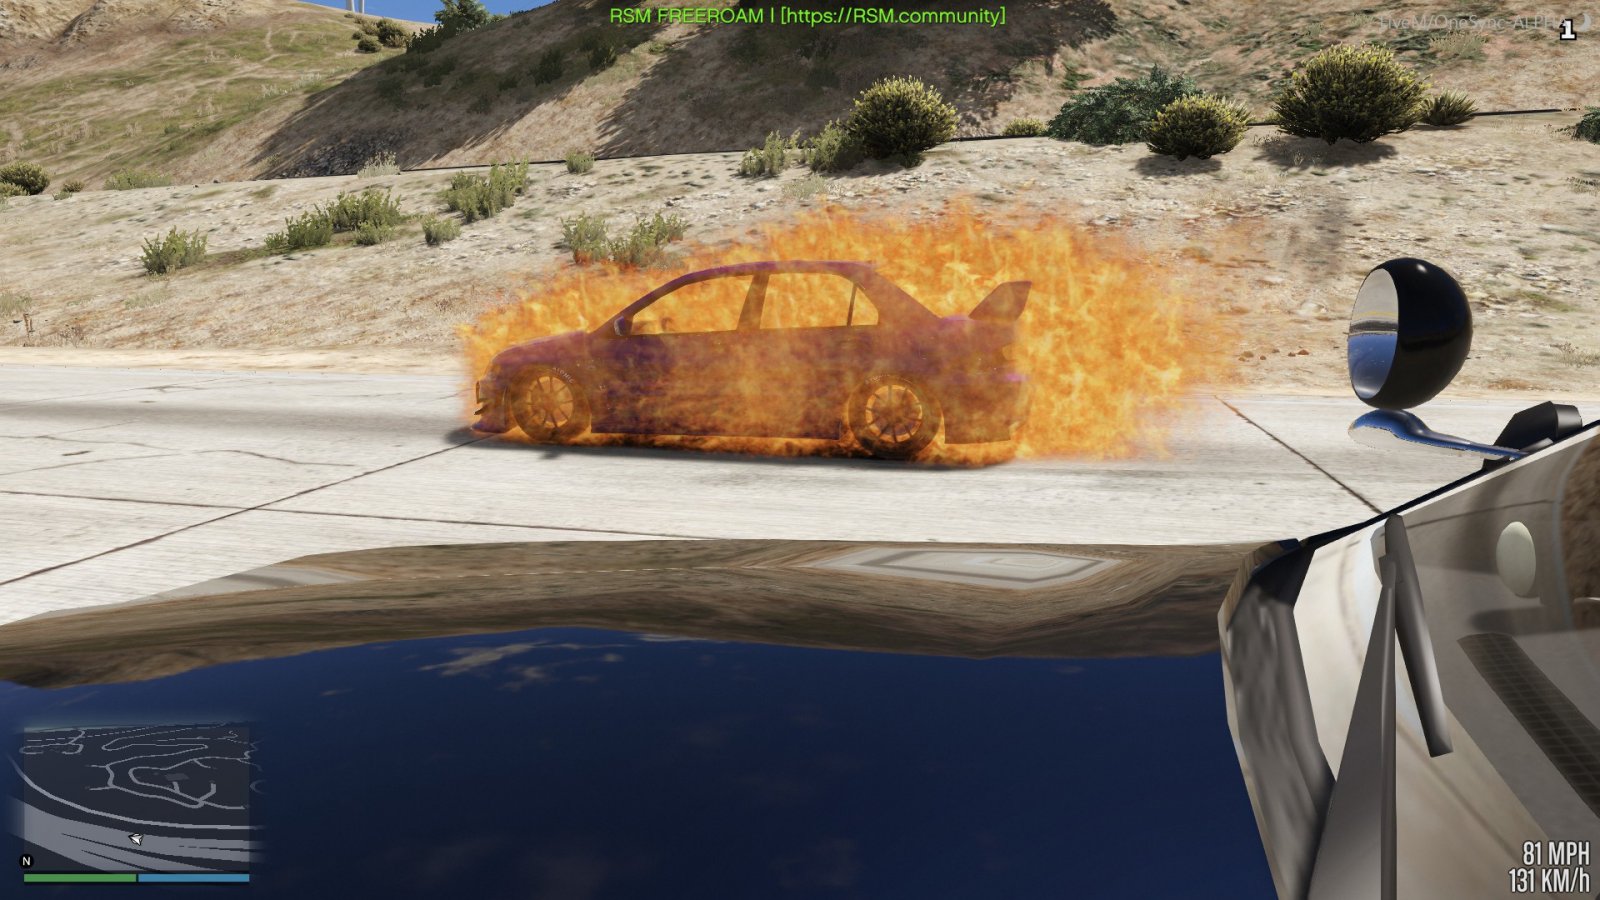 Chasing car on fire with no driver